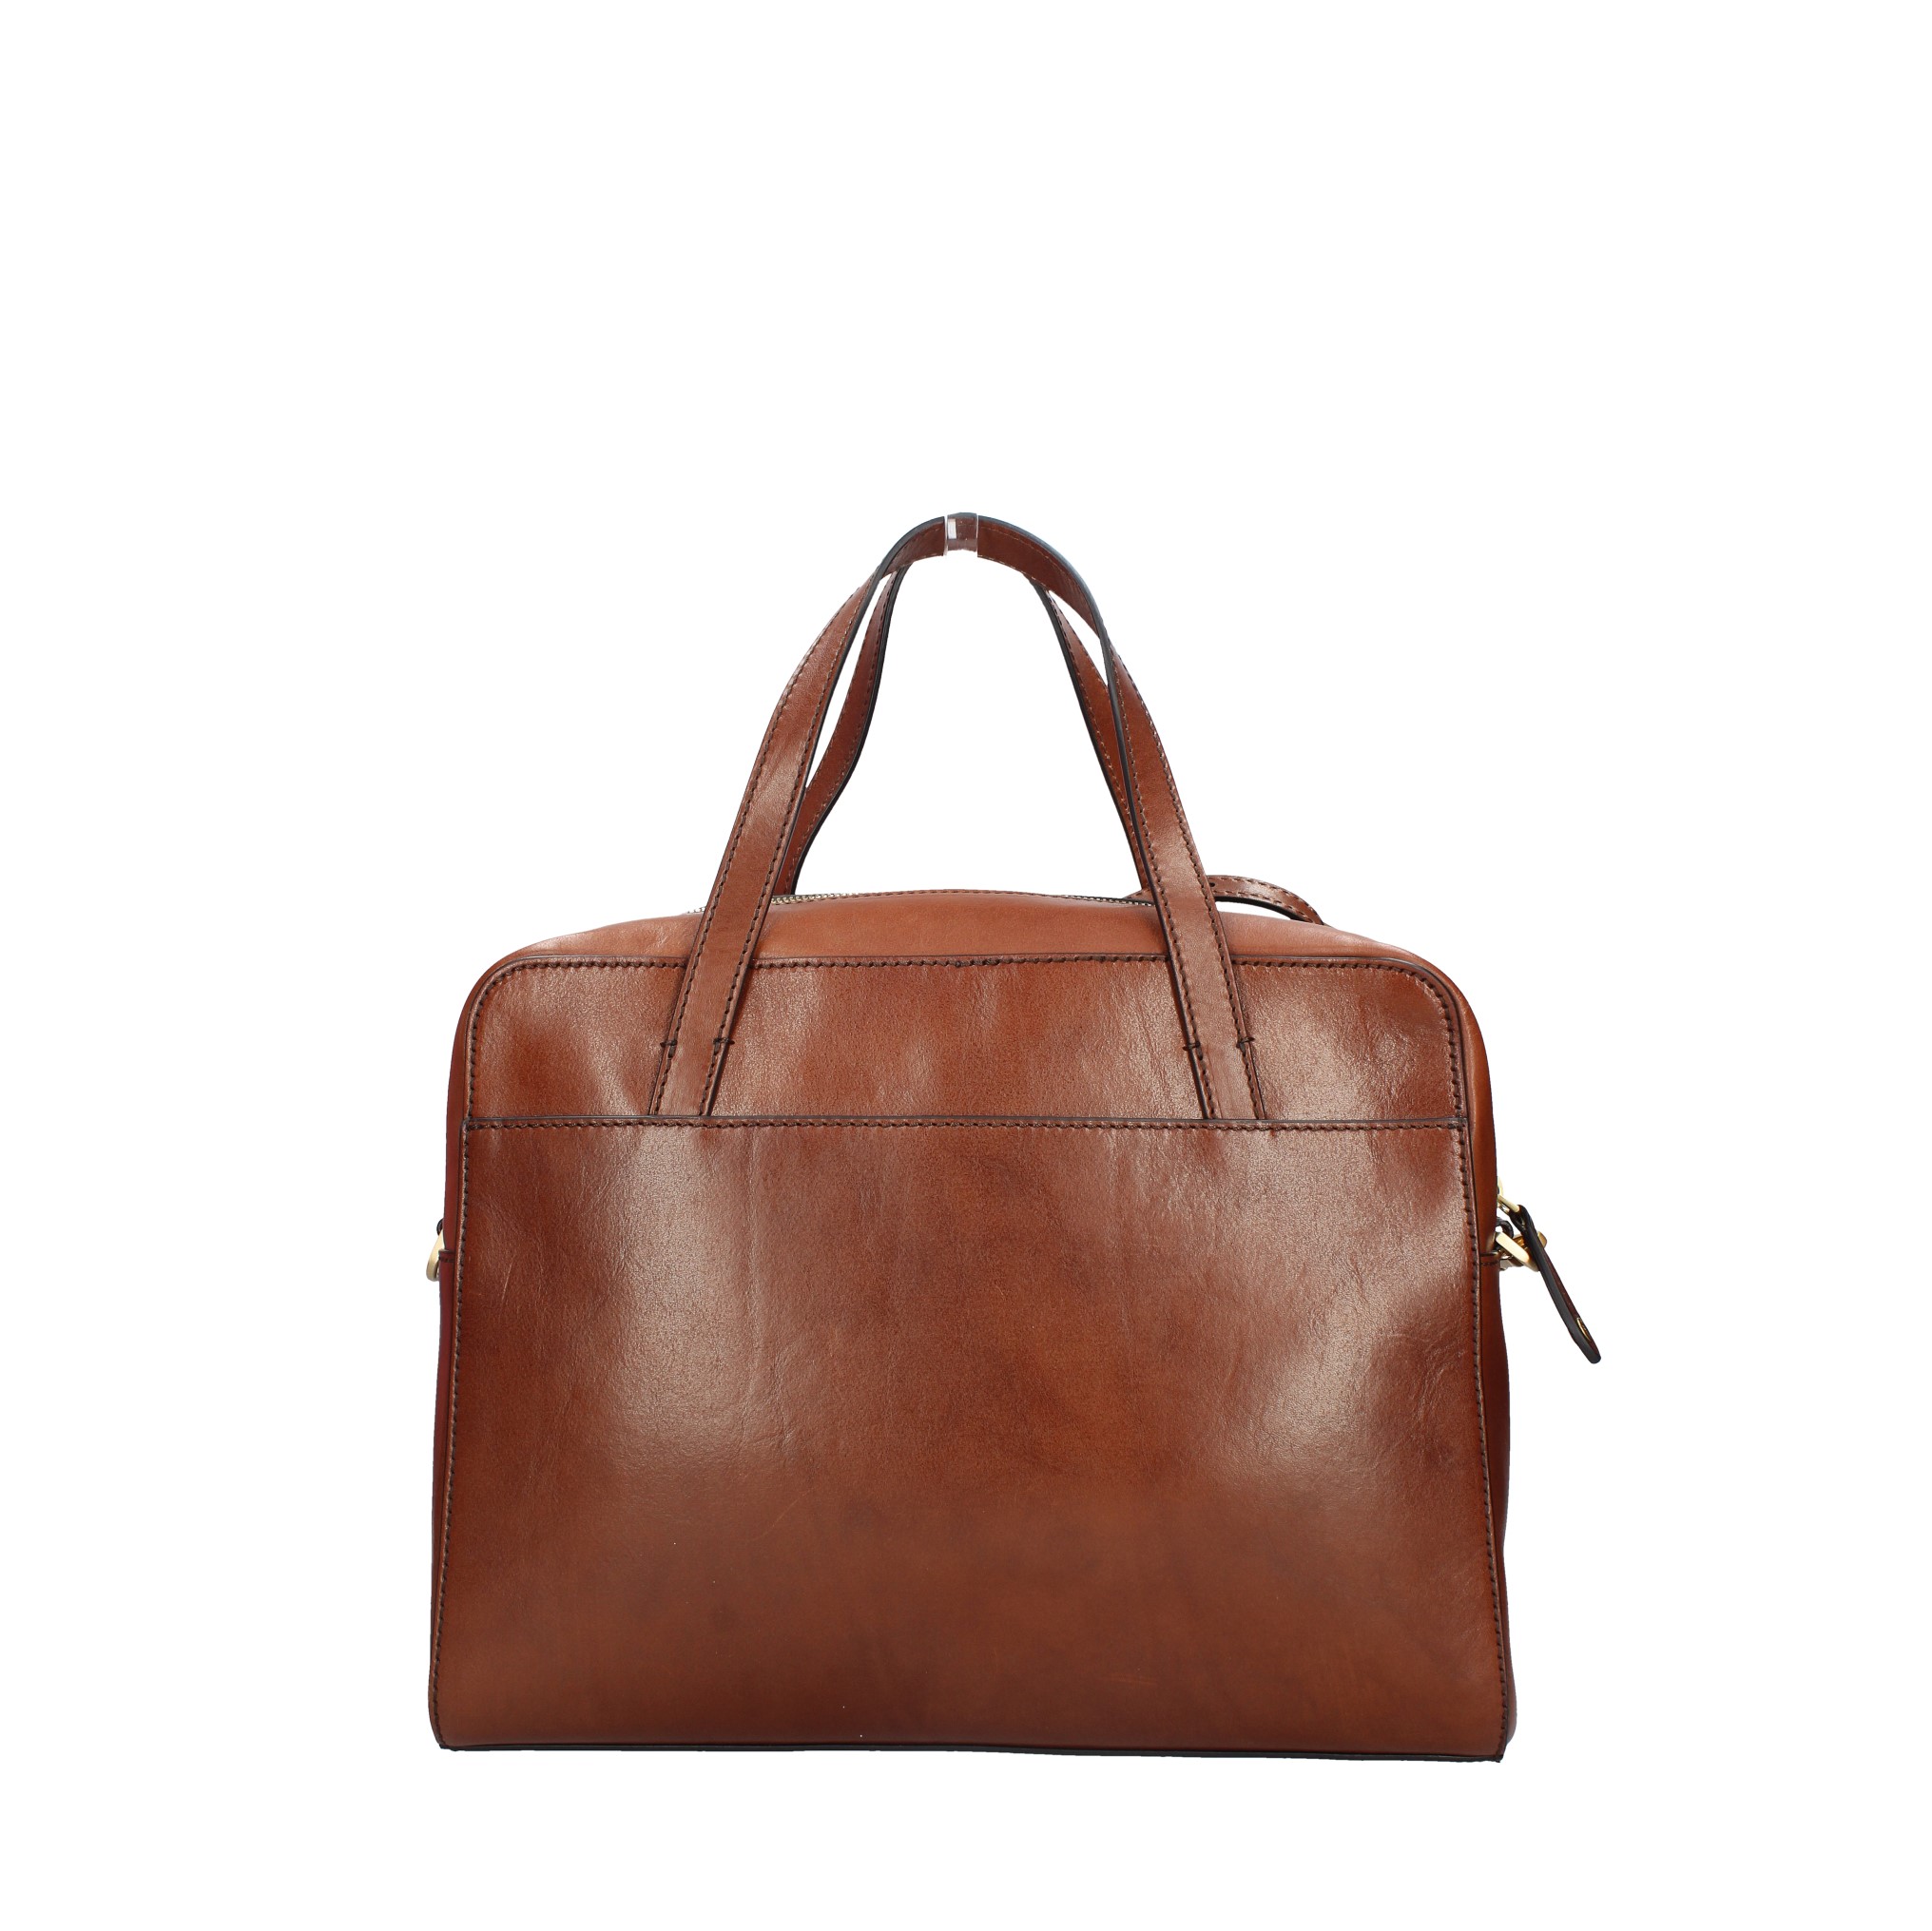 Leather bag and briefcase - THE BRIDGE - Ginevra calzature